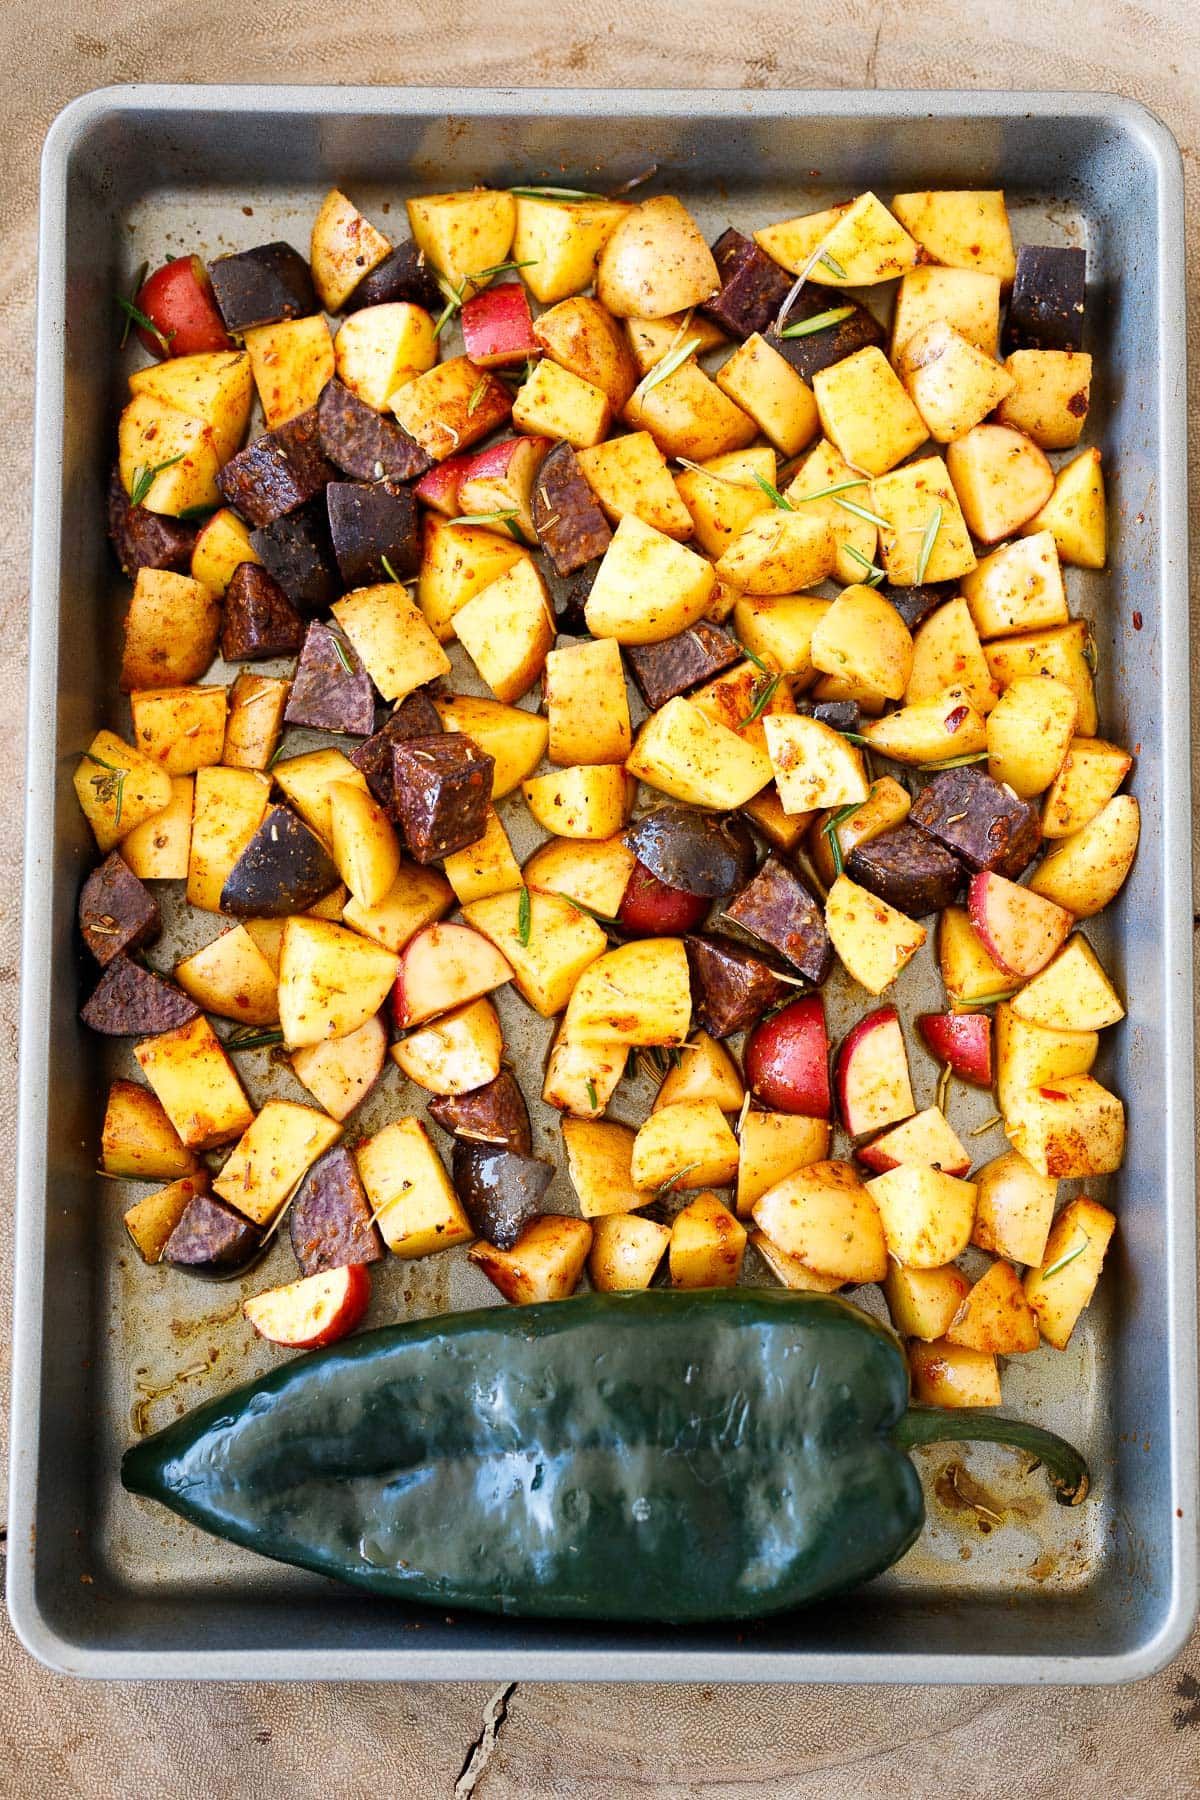 diced potatoes on sheet pan with spices and herbs, beside whole poblano pepper.